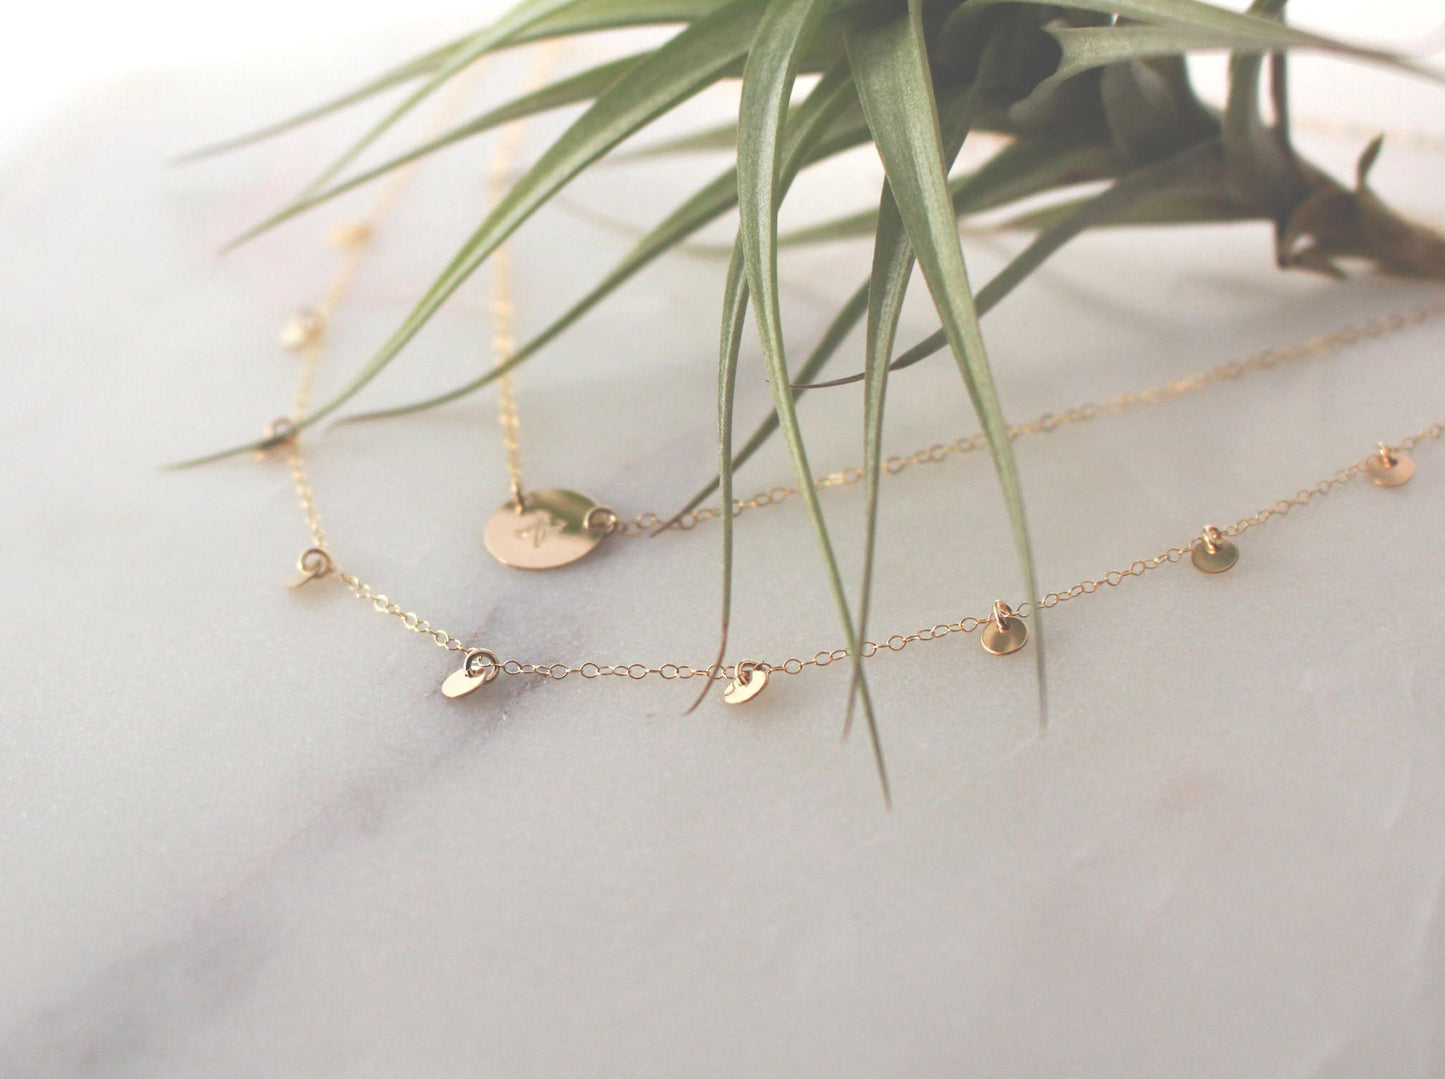 Tiny Gold Disc Necklace - 14k Gold Filled, 4mm Tiny Disc